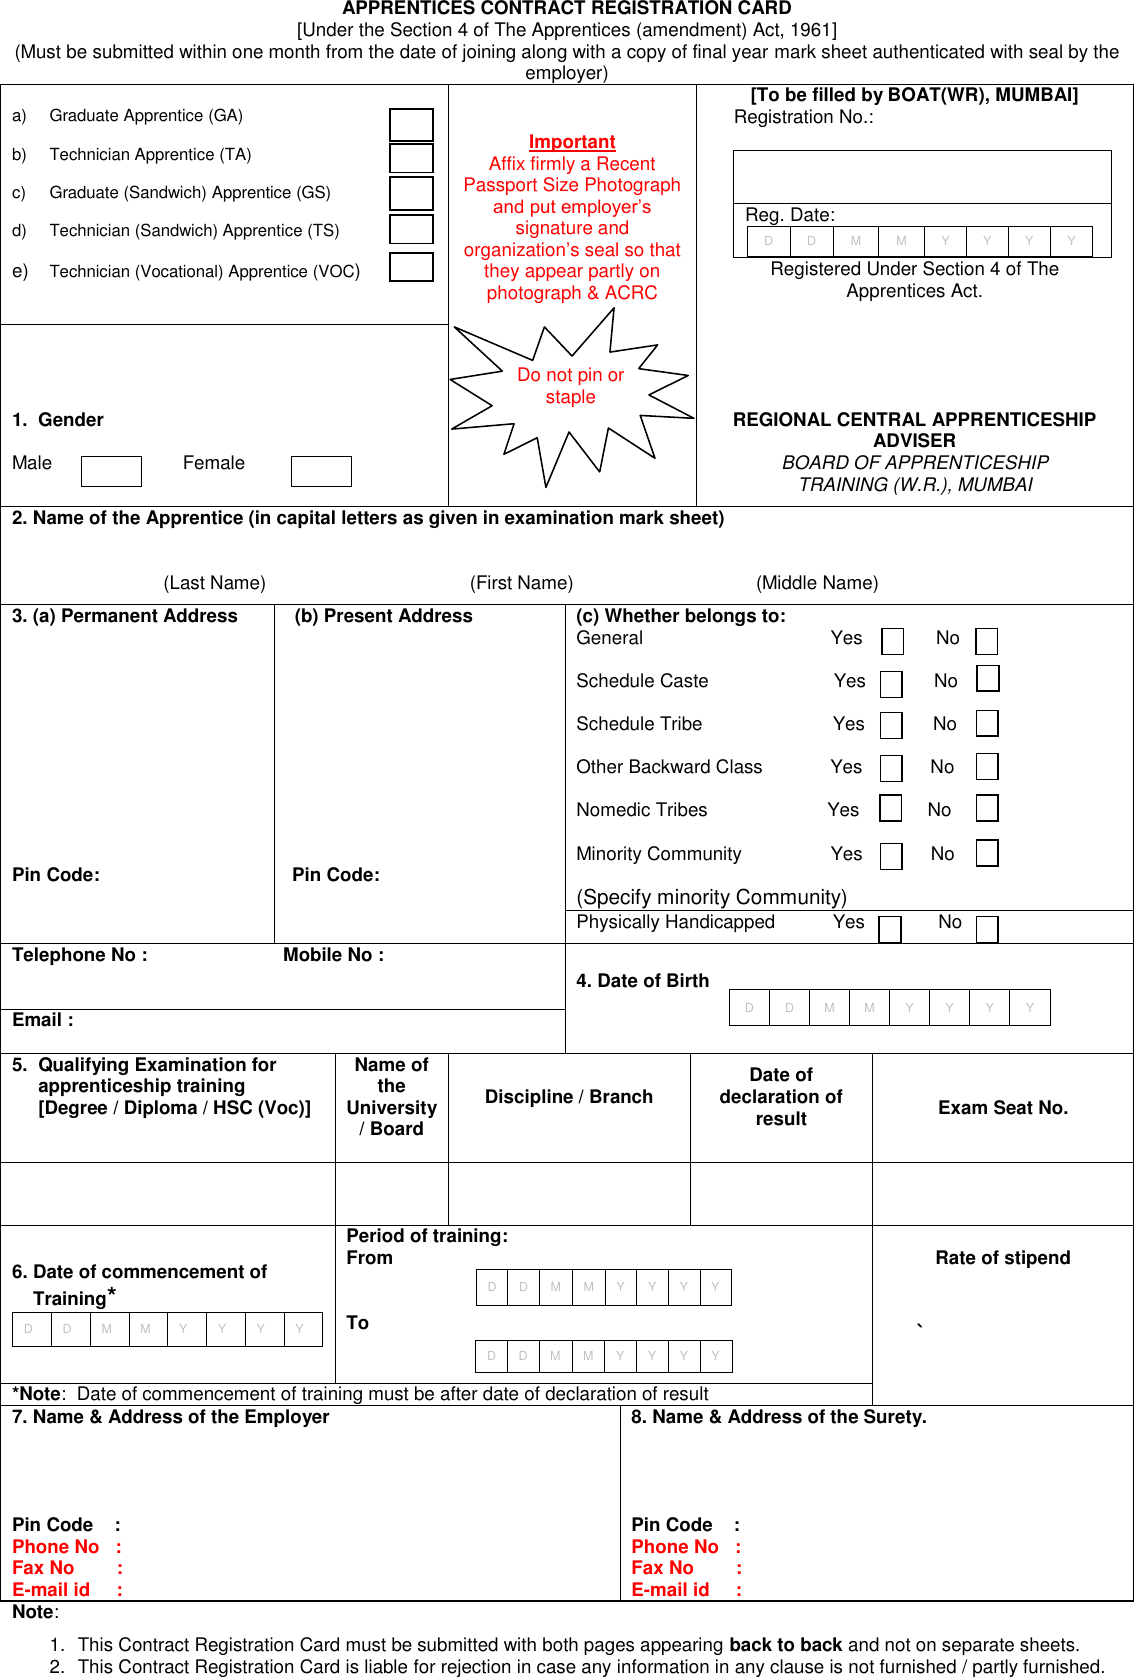 Page 1 of 2 - APPRENTICES CONTRACT REGISTRATION CARD MANUAL SUBMISSION Apprentice Blank Form